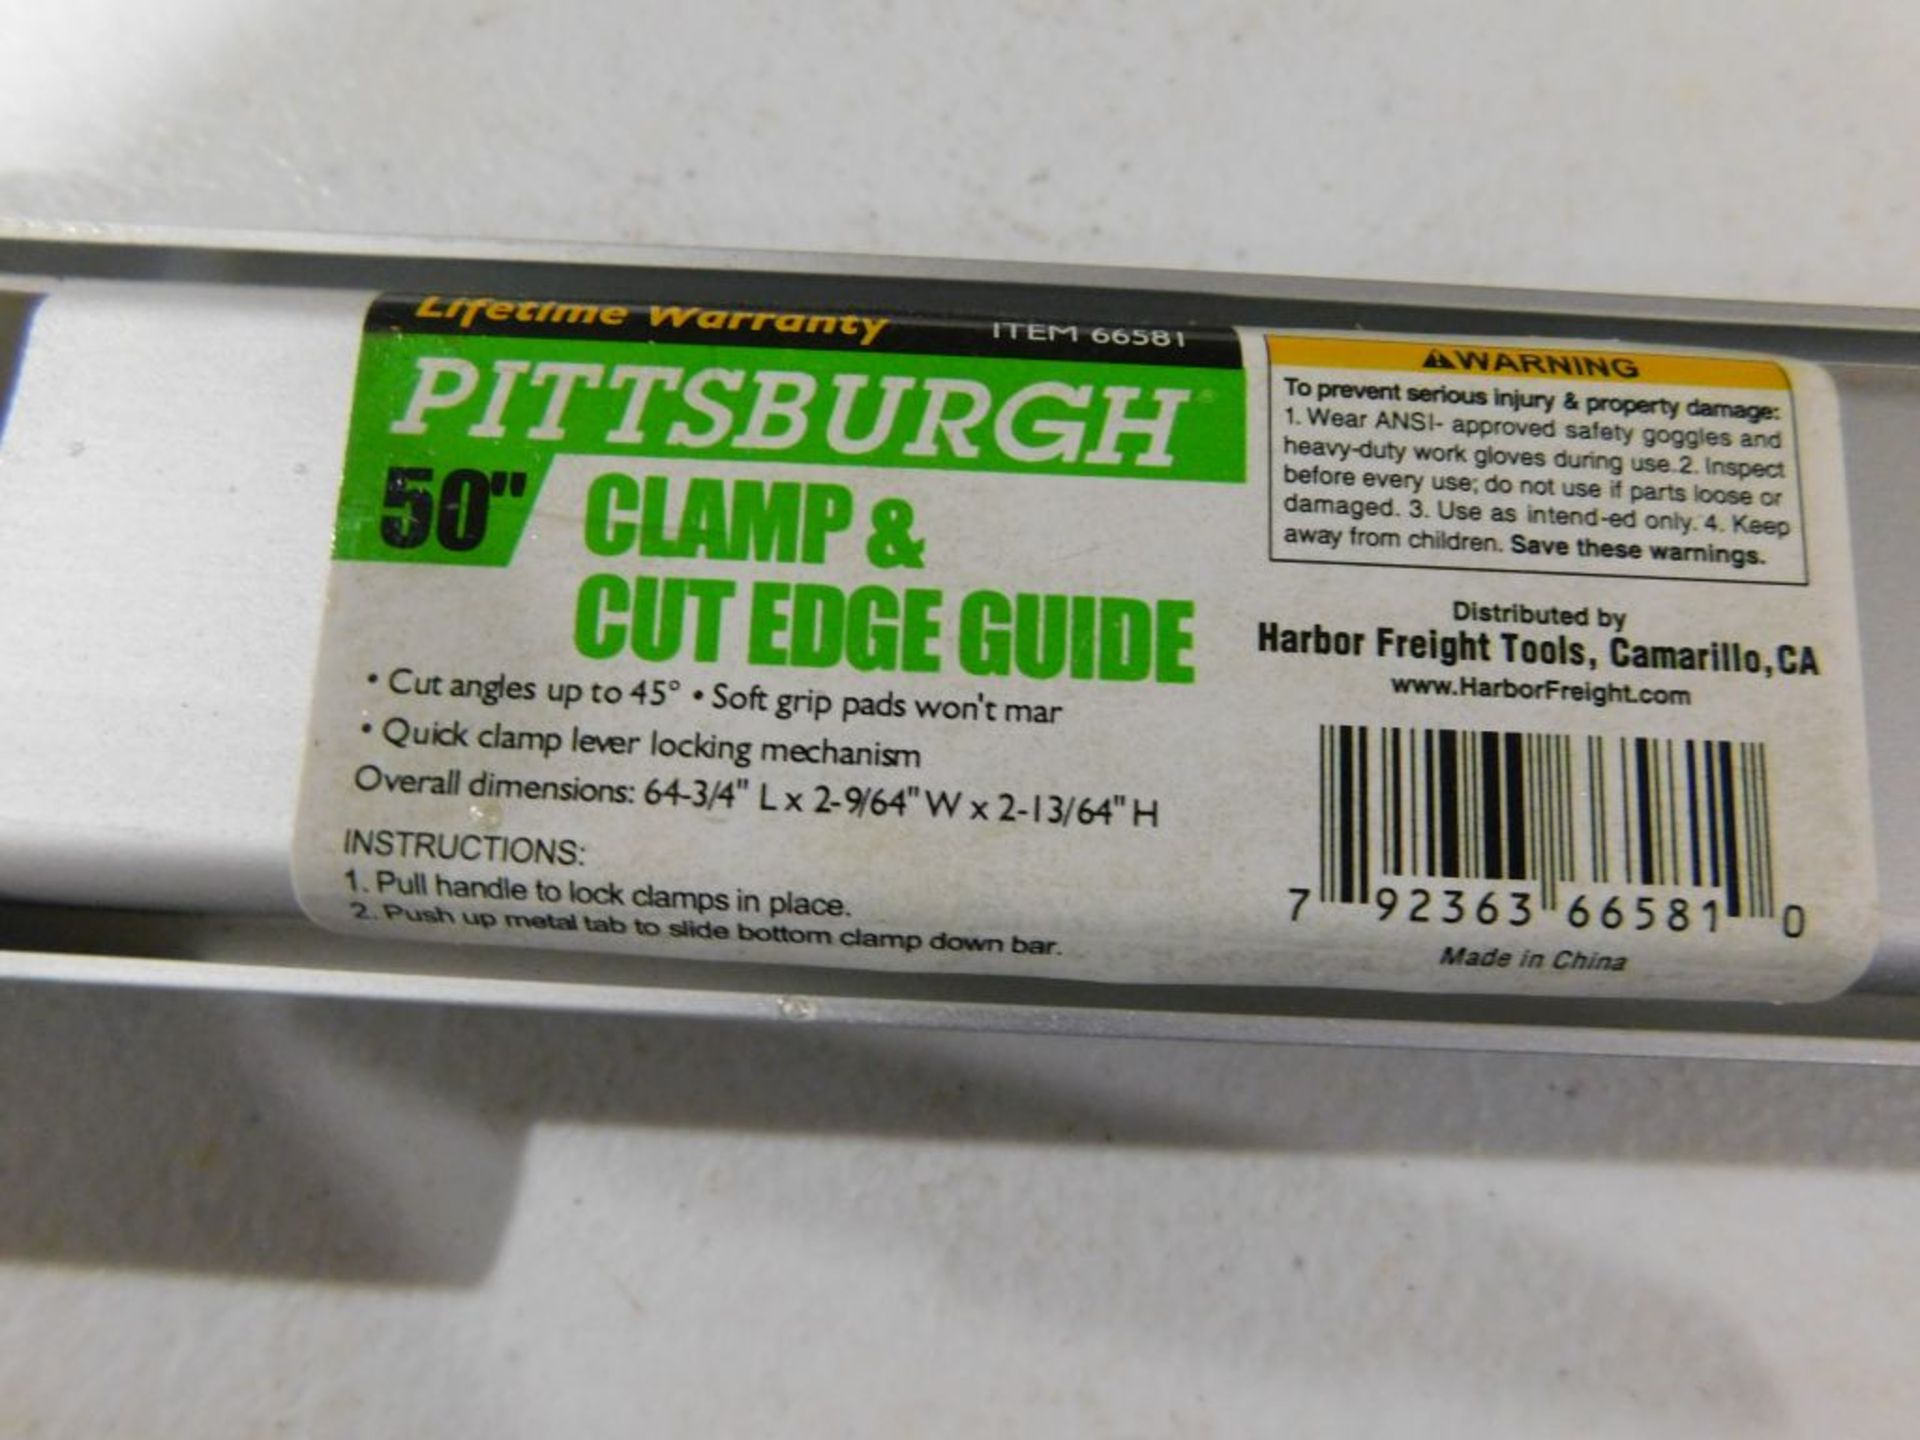 Pittsburg Clamp & Cut edge guide, 50", cut angles up to 45 degree, soft grip pads, quick clamp lever - Image 2 of 5